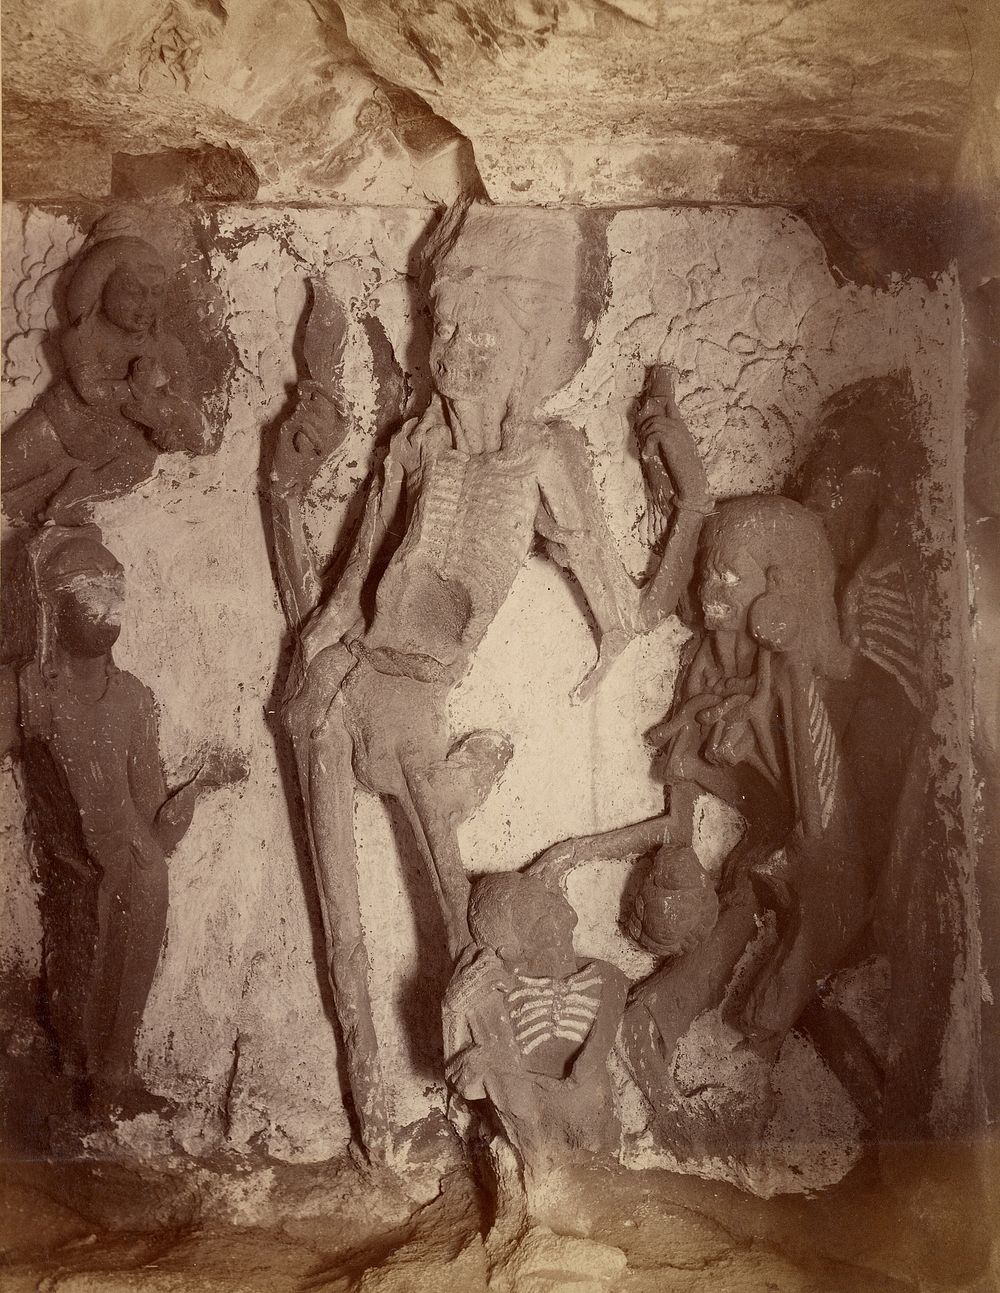 Figures Carved in Rameshwar Cave by Lala Deen Dayal